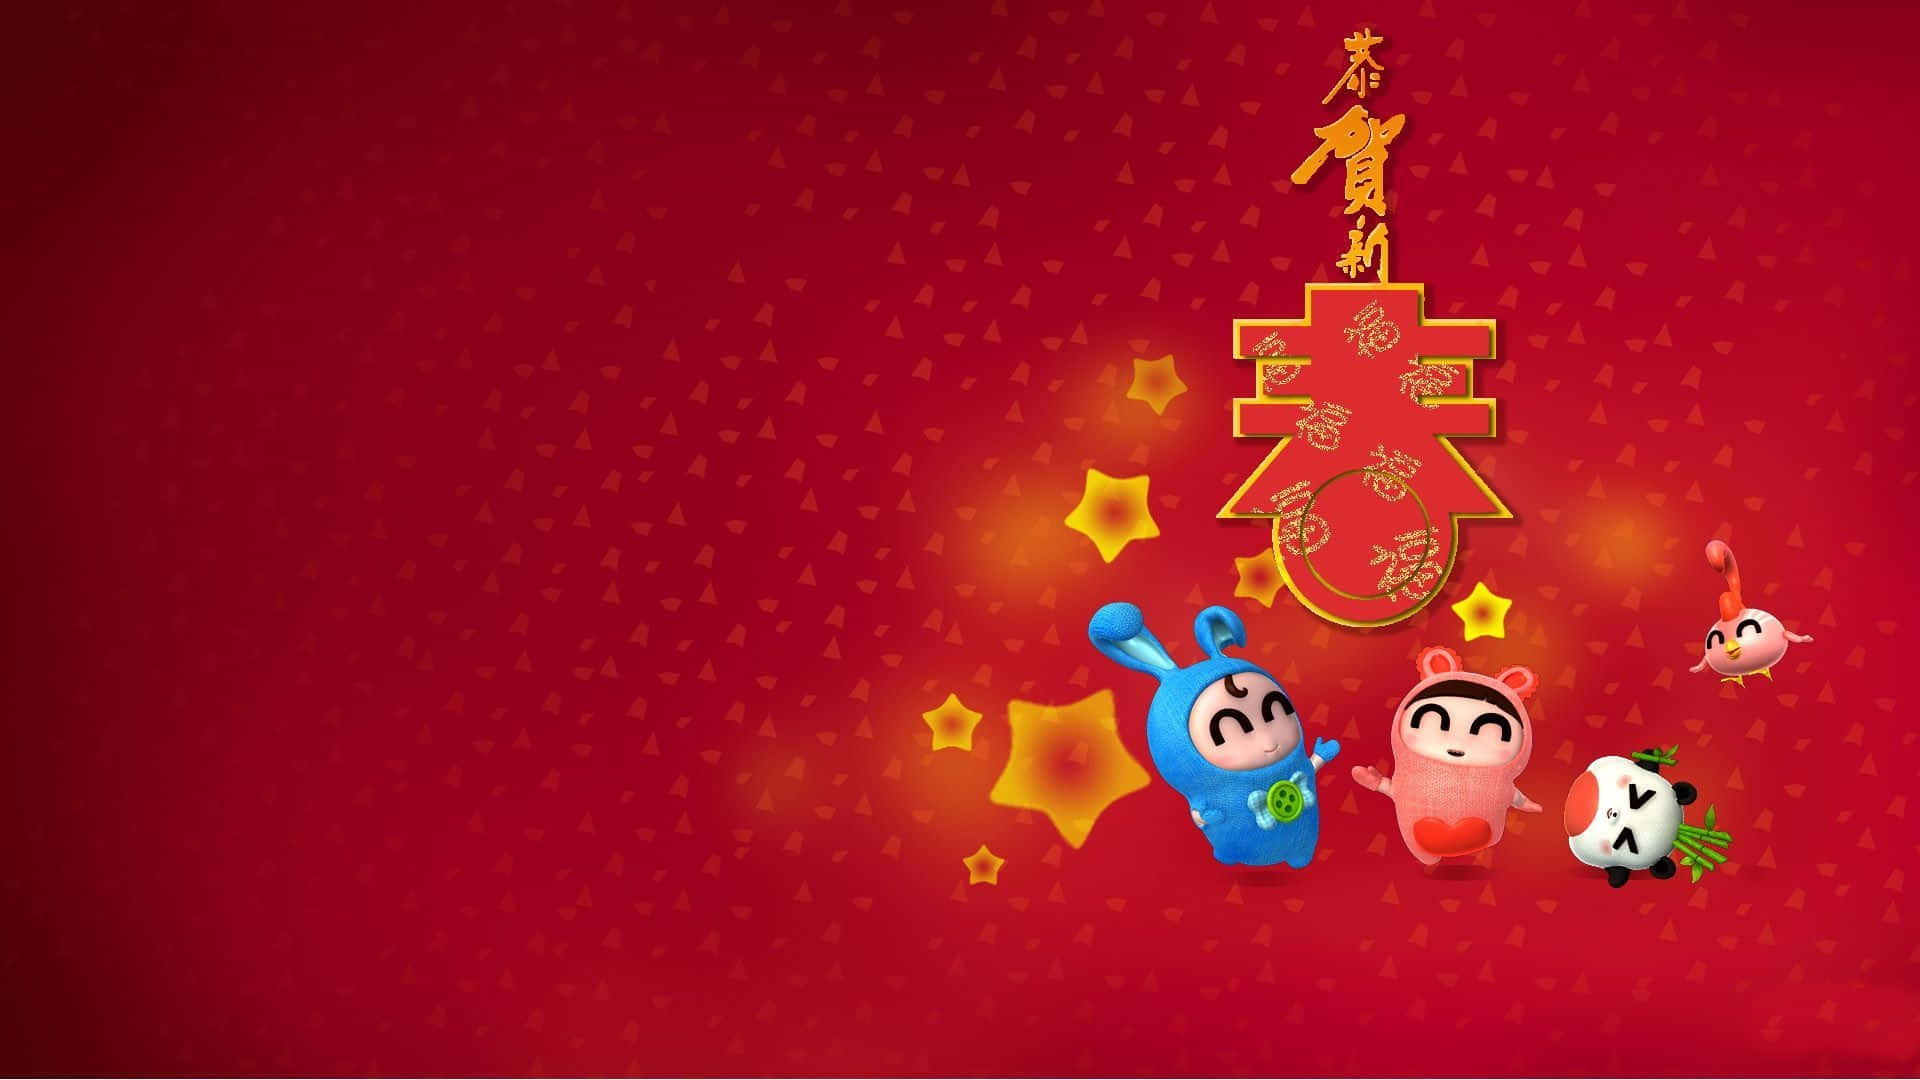 Ushering In Prosperity With The Chinese New Year 2022 Background